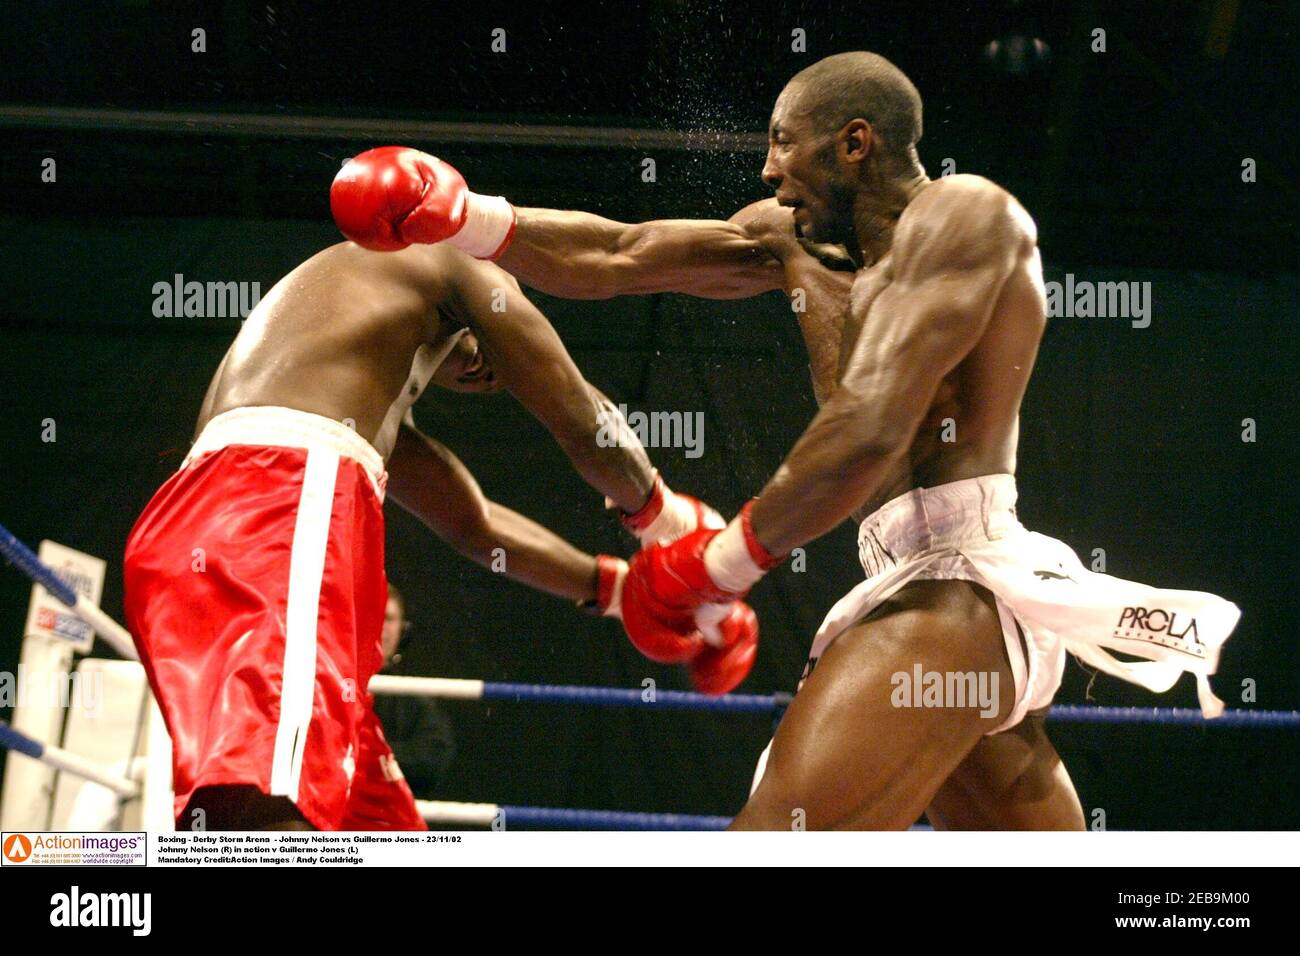 Boxing - Derby Storm Arena - Johnny Nelson vs Guillermo Jones - 23/11/02  Johnny Nelson (R) in action v Guillermo Jones (L) Mandatory Credit:Action  Images / Andy Couldridge Stock Photo - Alamy